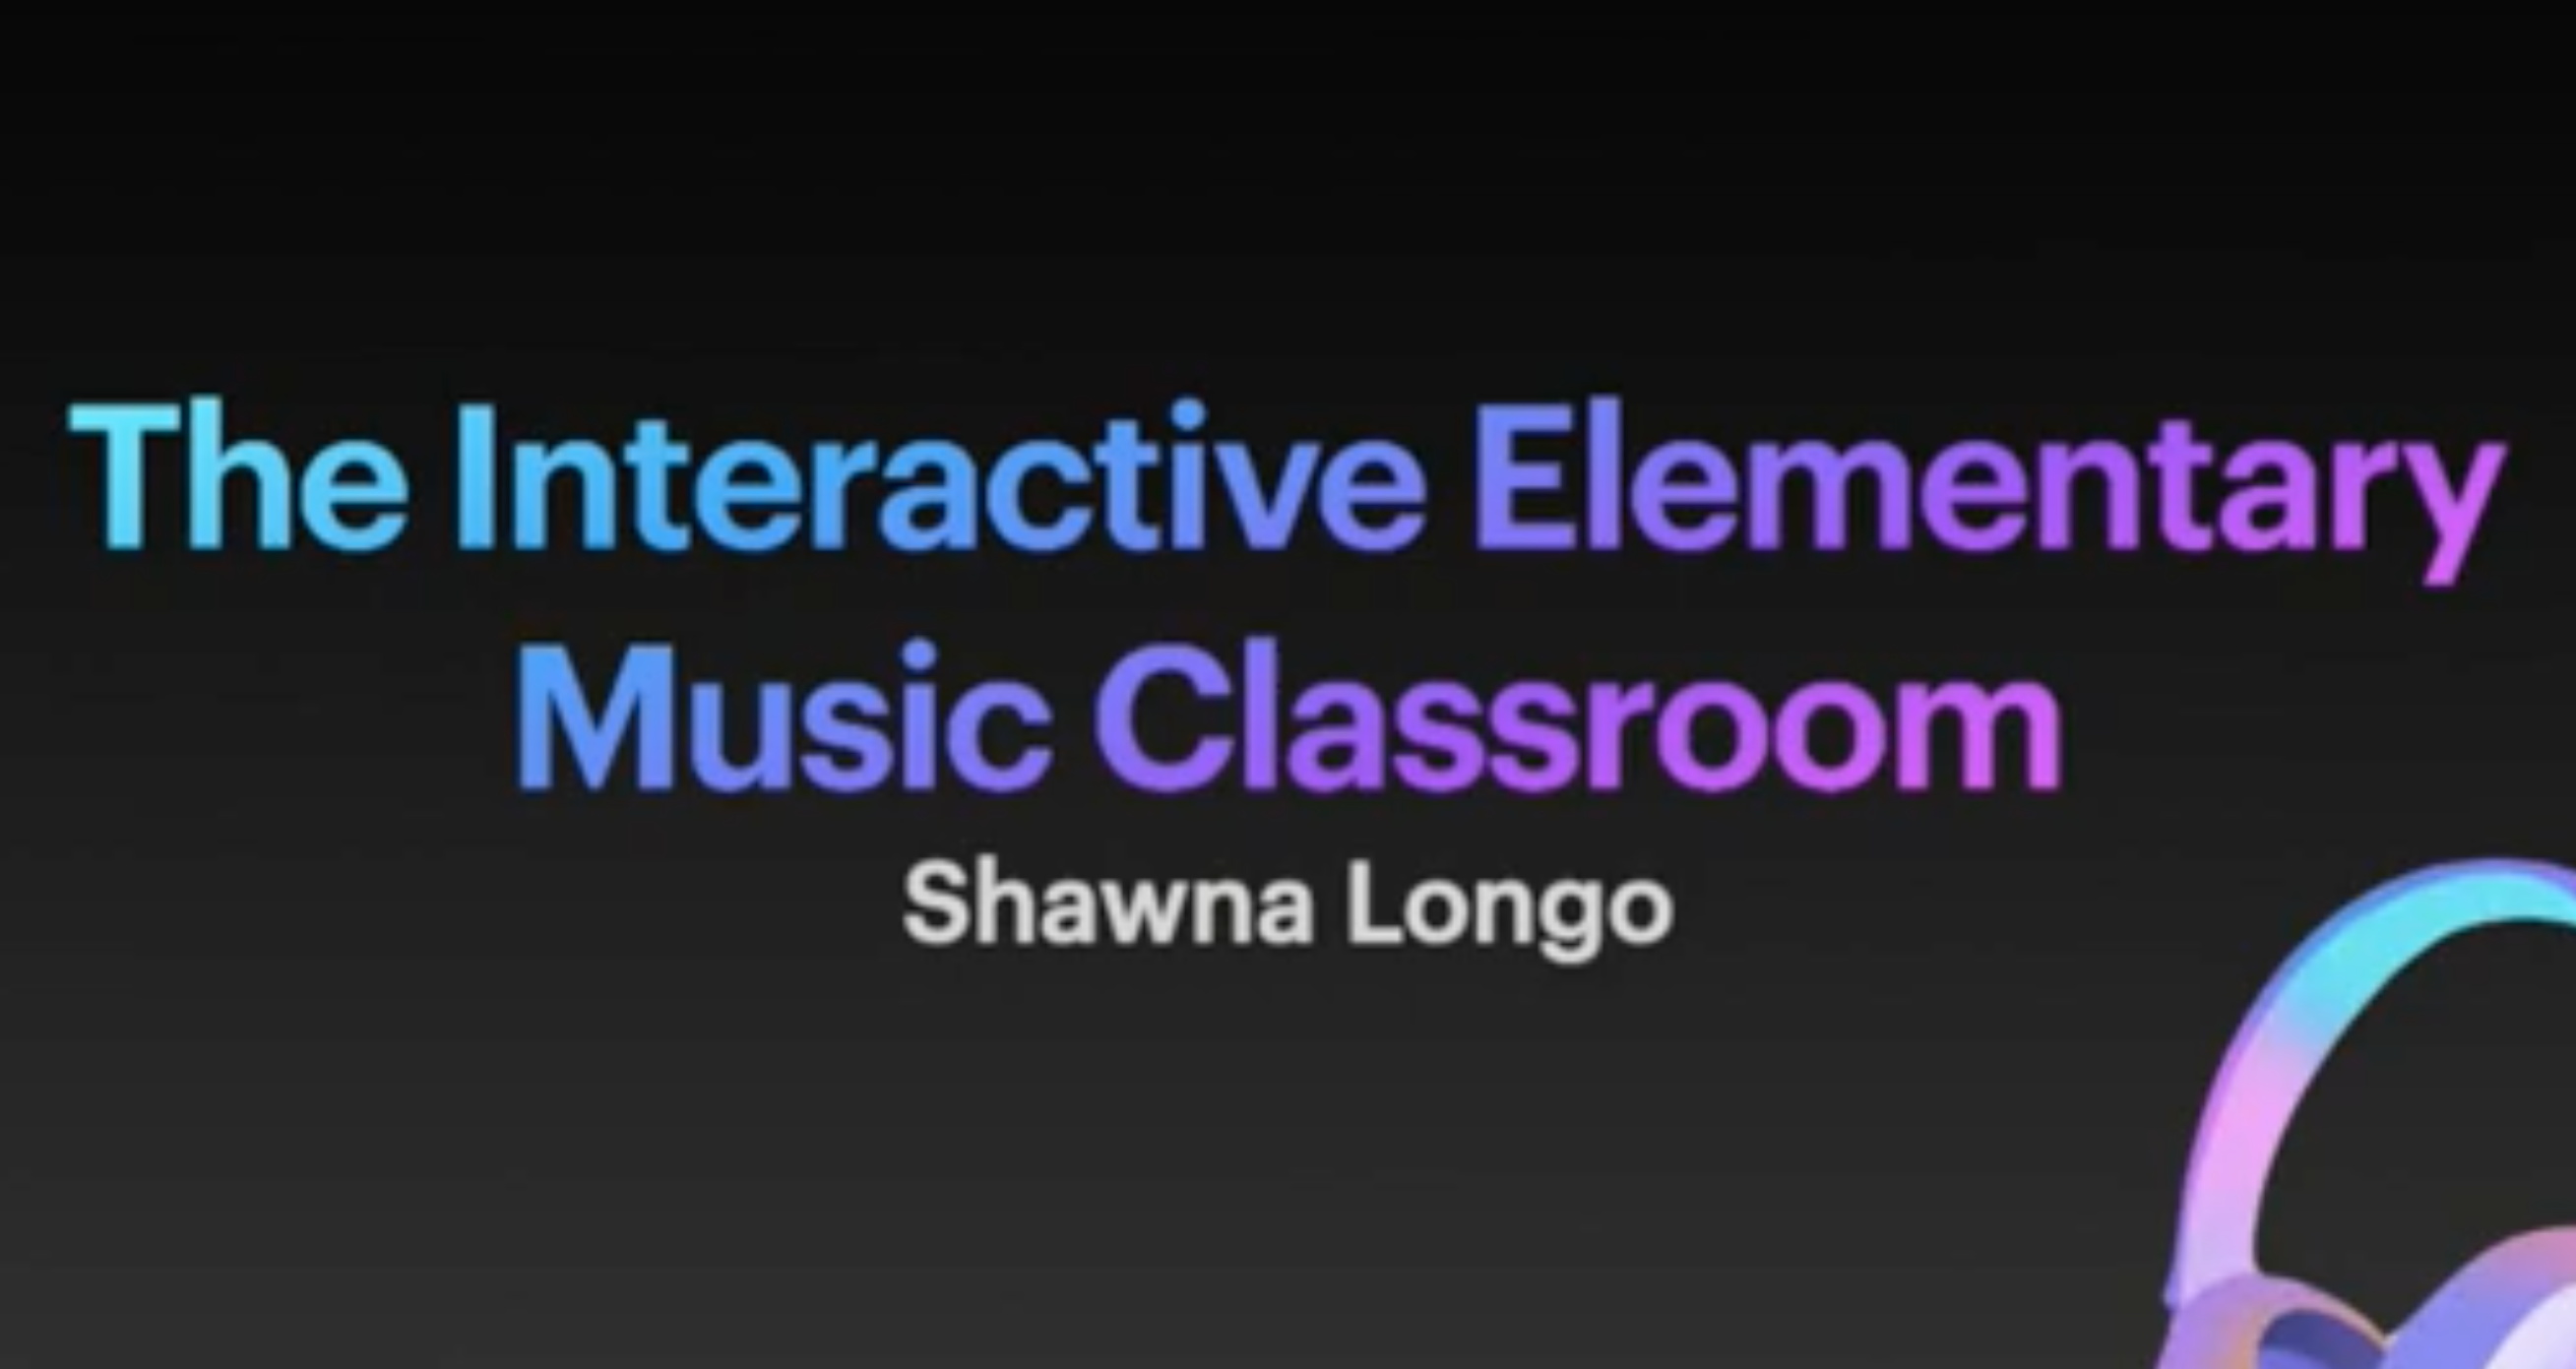 The Interactive Elementary Music Classroom